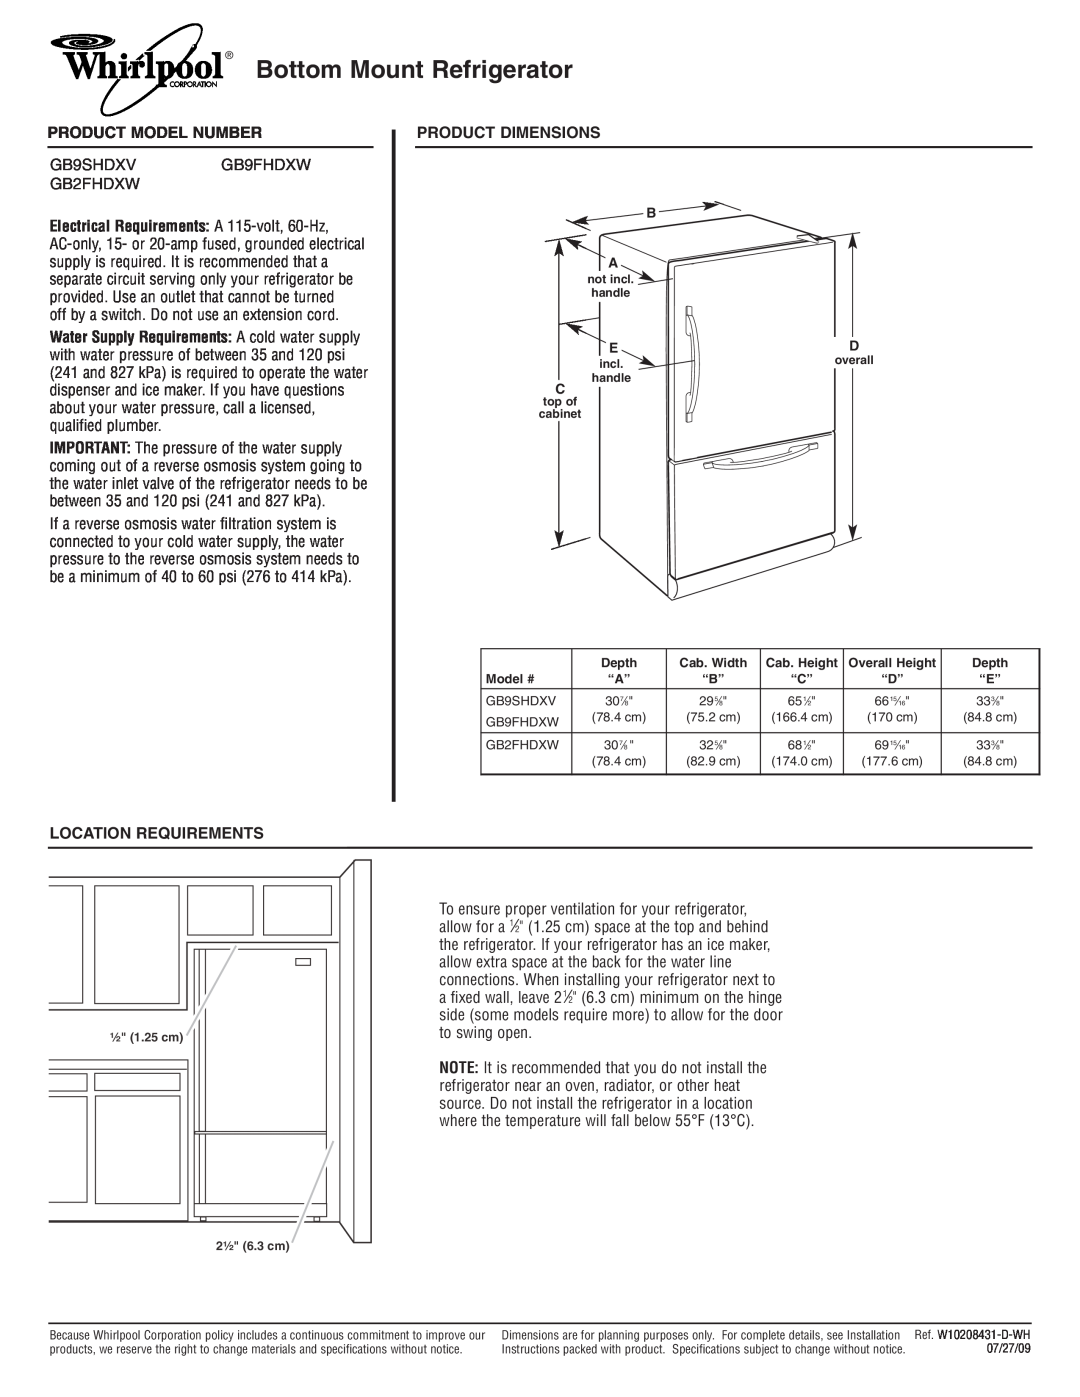 Whirlpool dimensions Bottom Mount Refrigerator, Product Model Number, GB9SHDXVGB9FHDXW GB2FHDXW, Product Dimensions 